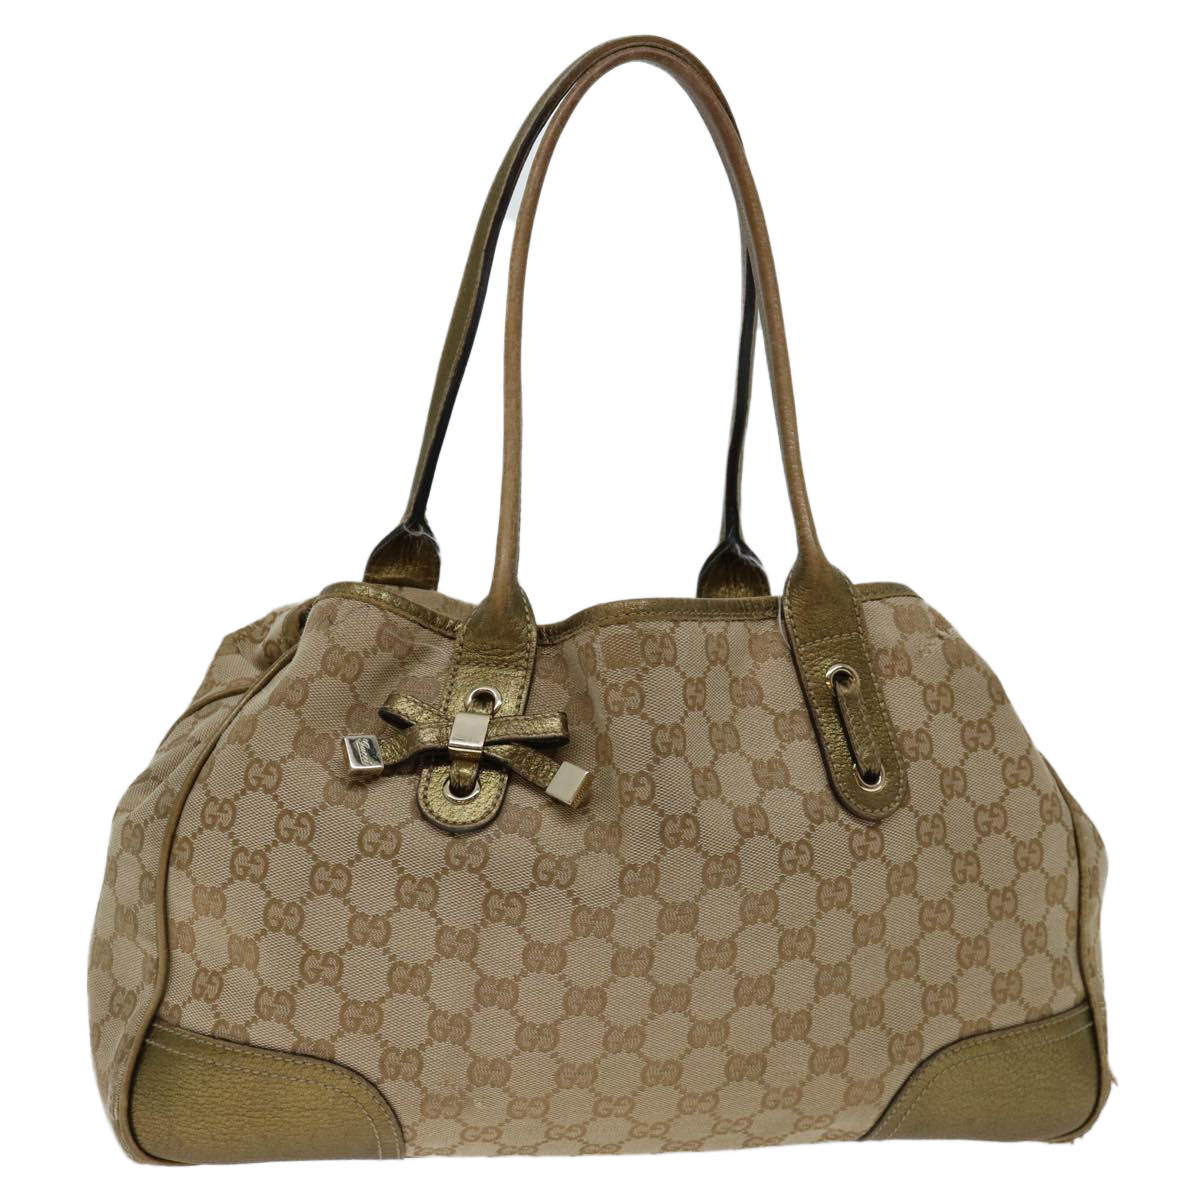 GUCCI GG Canvas Tote Bag Beige Gold 163805 Auth 69641